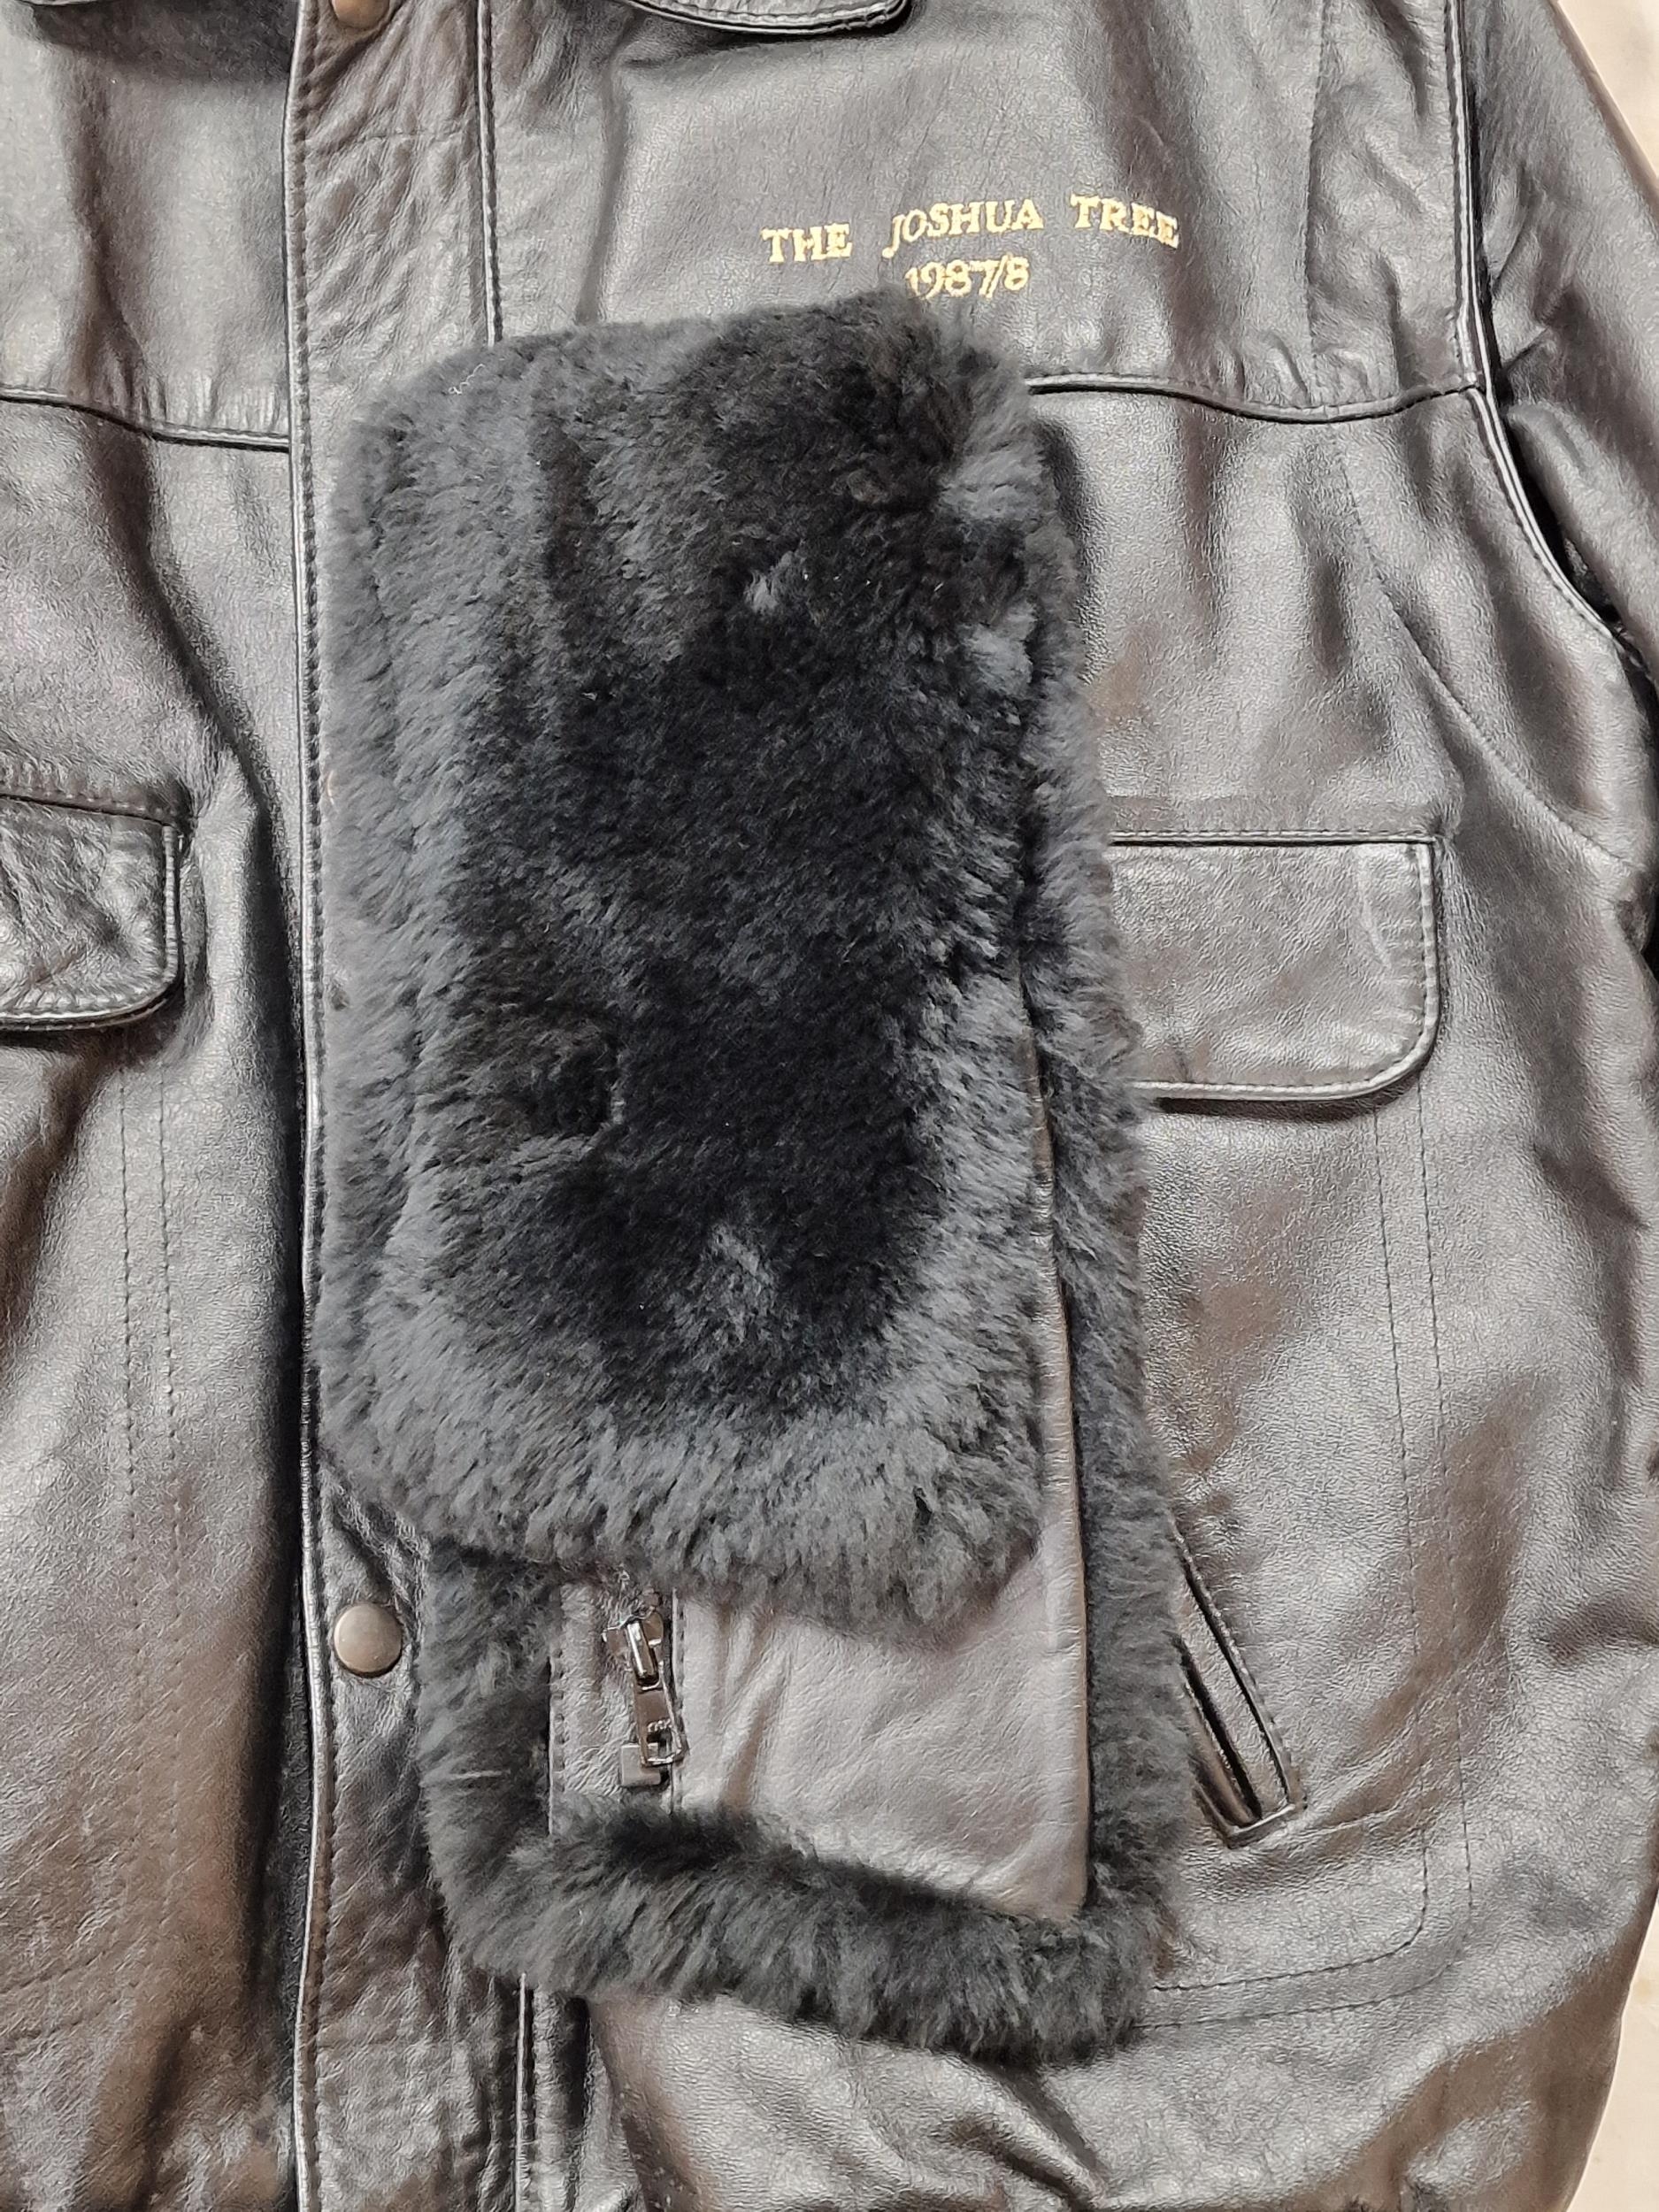 Rare U2 The Joshua Tree 1987/1988 Leather Crew Jacket. Size L. Mint, Unworn Condition With - Image 3 of 4